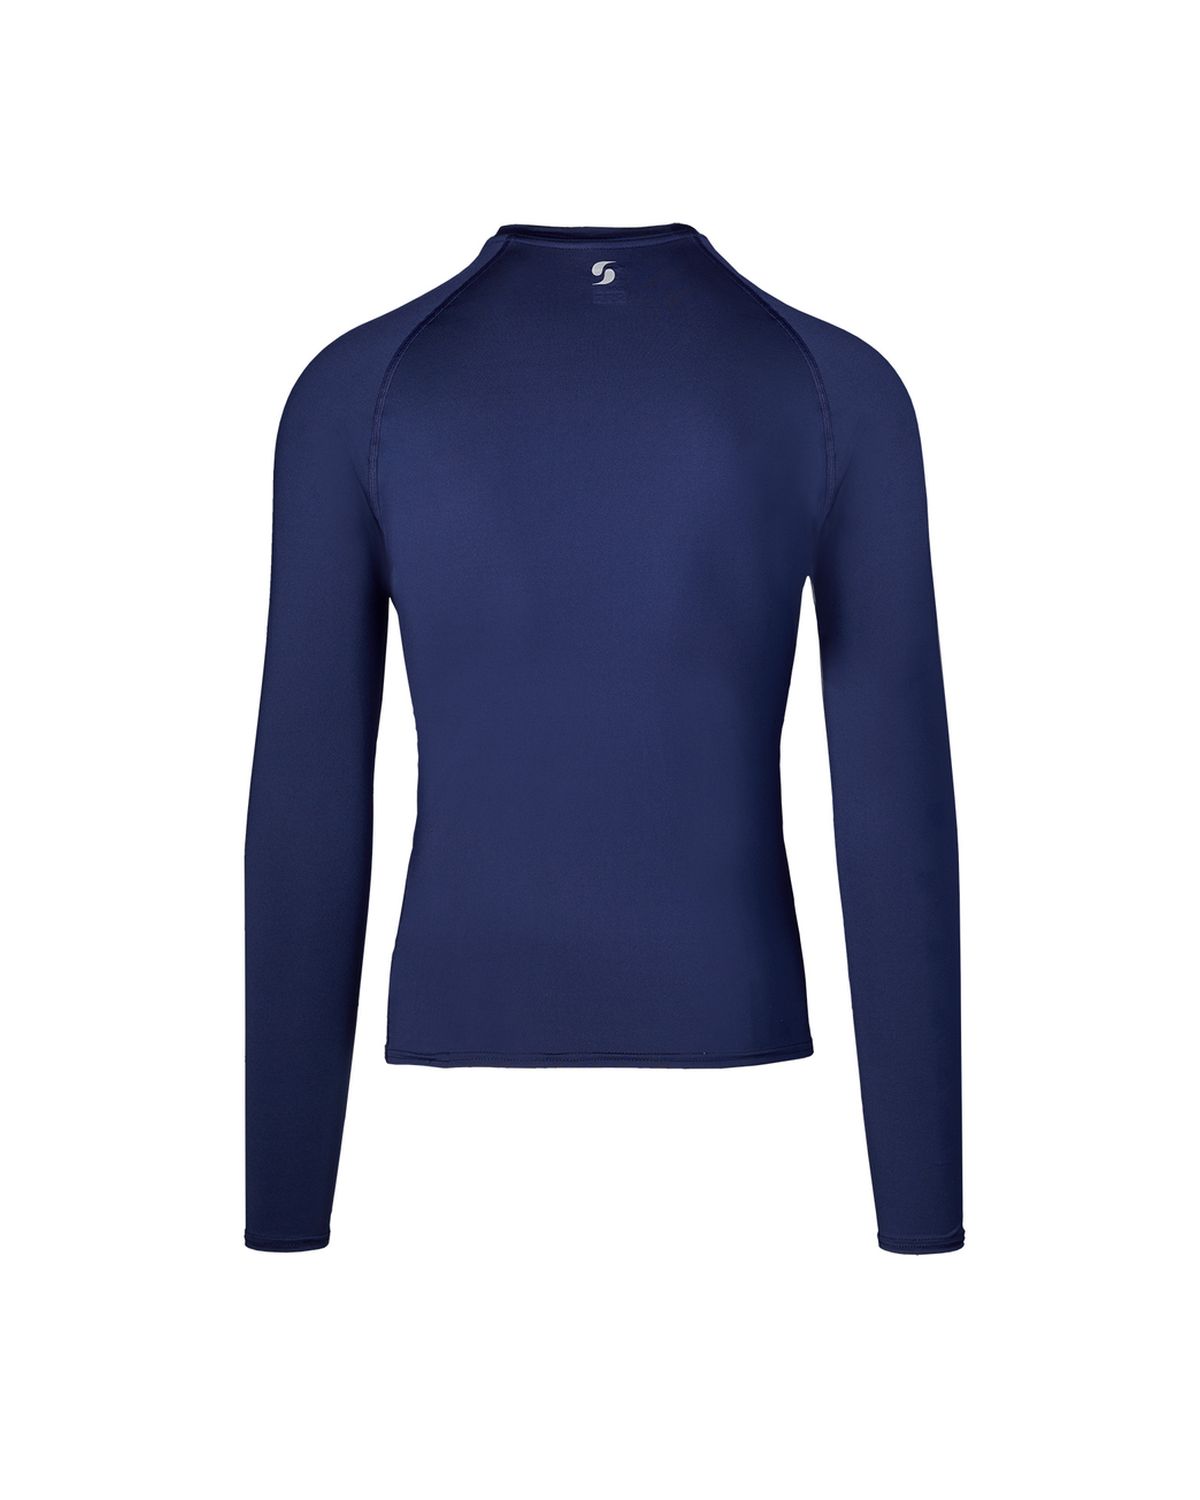 'Soffe 1189M Adult Tight Fit Long Sleeve Tee'